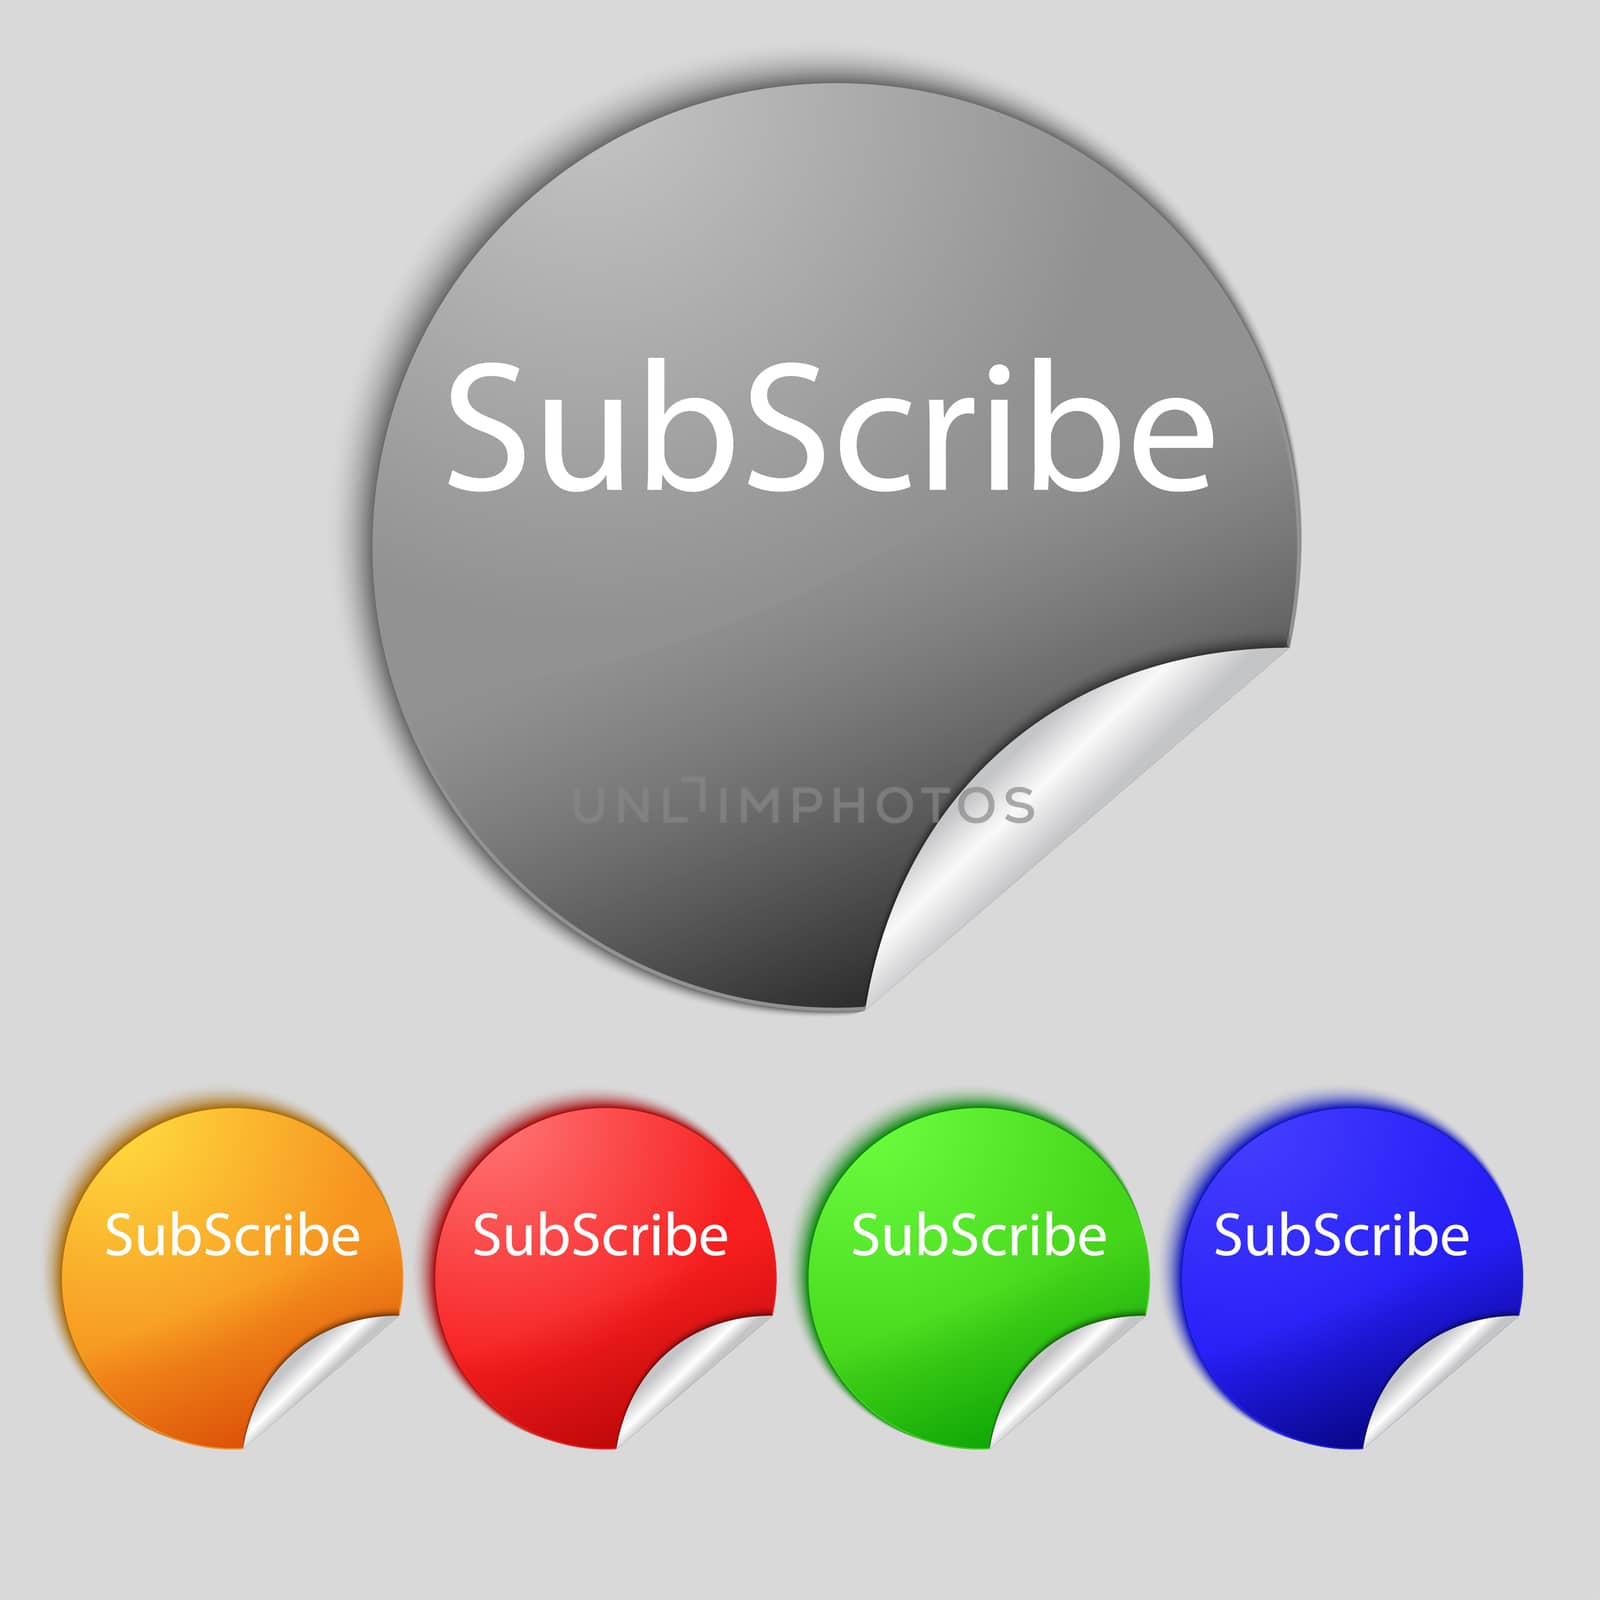 Subscribe sign icon. Membership symbol. Website navigation. Set of colored buttons illustration